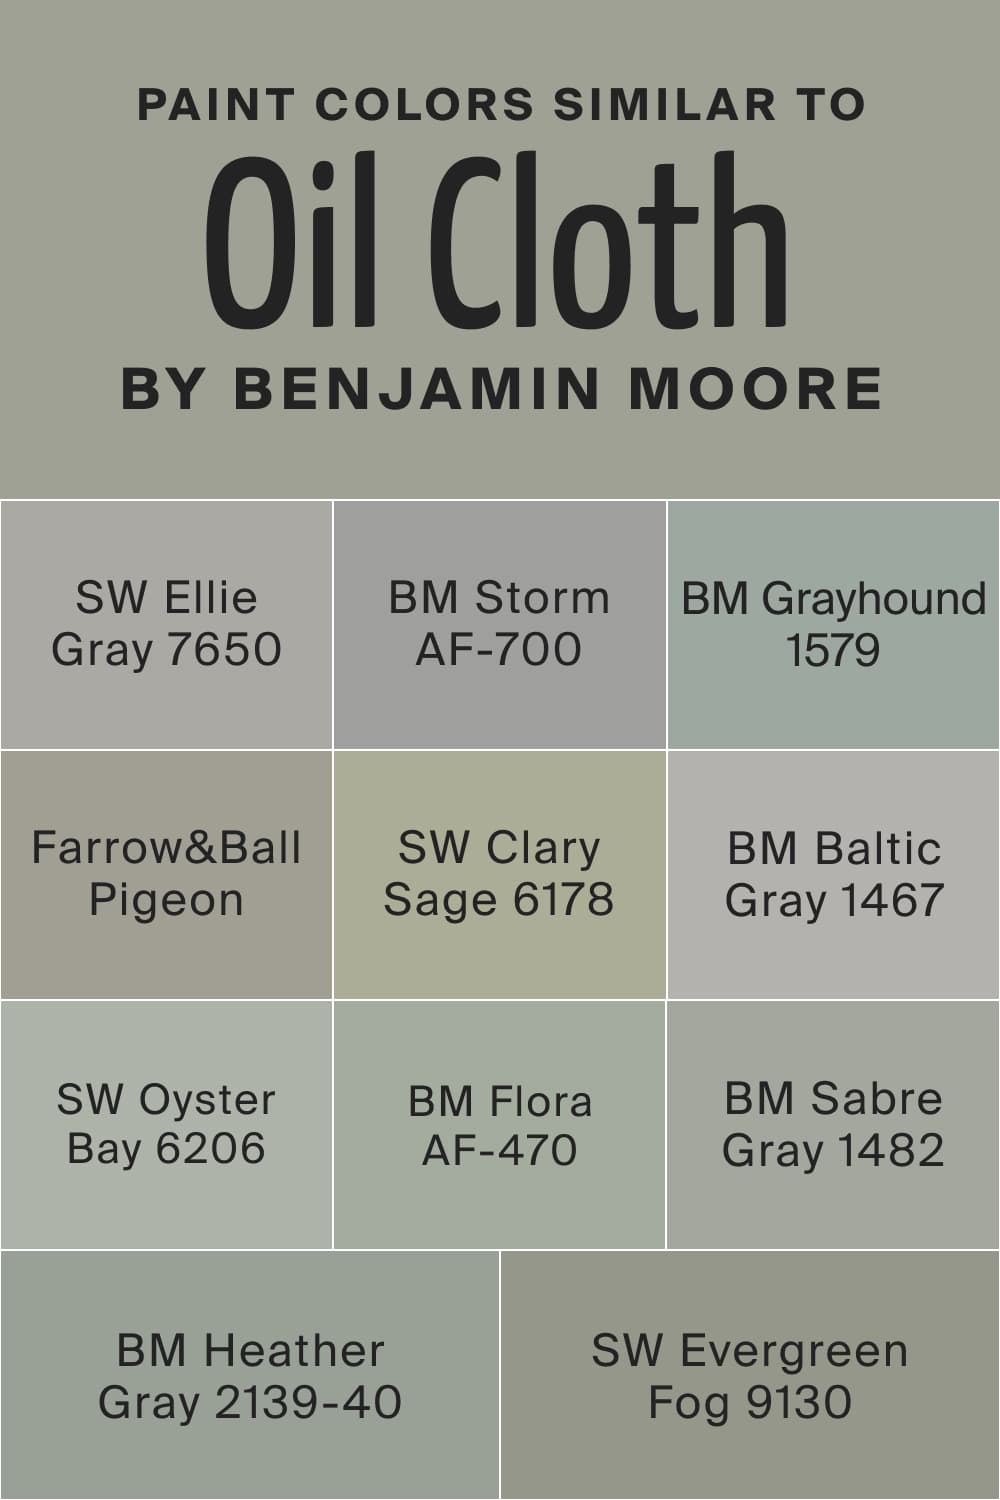 Paint Colors Similar to Oil Cloth CSP 760 by Benjamin Moore